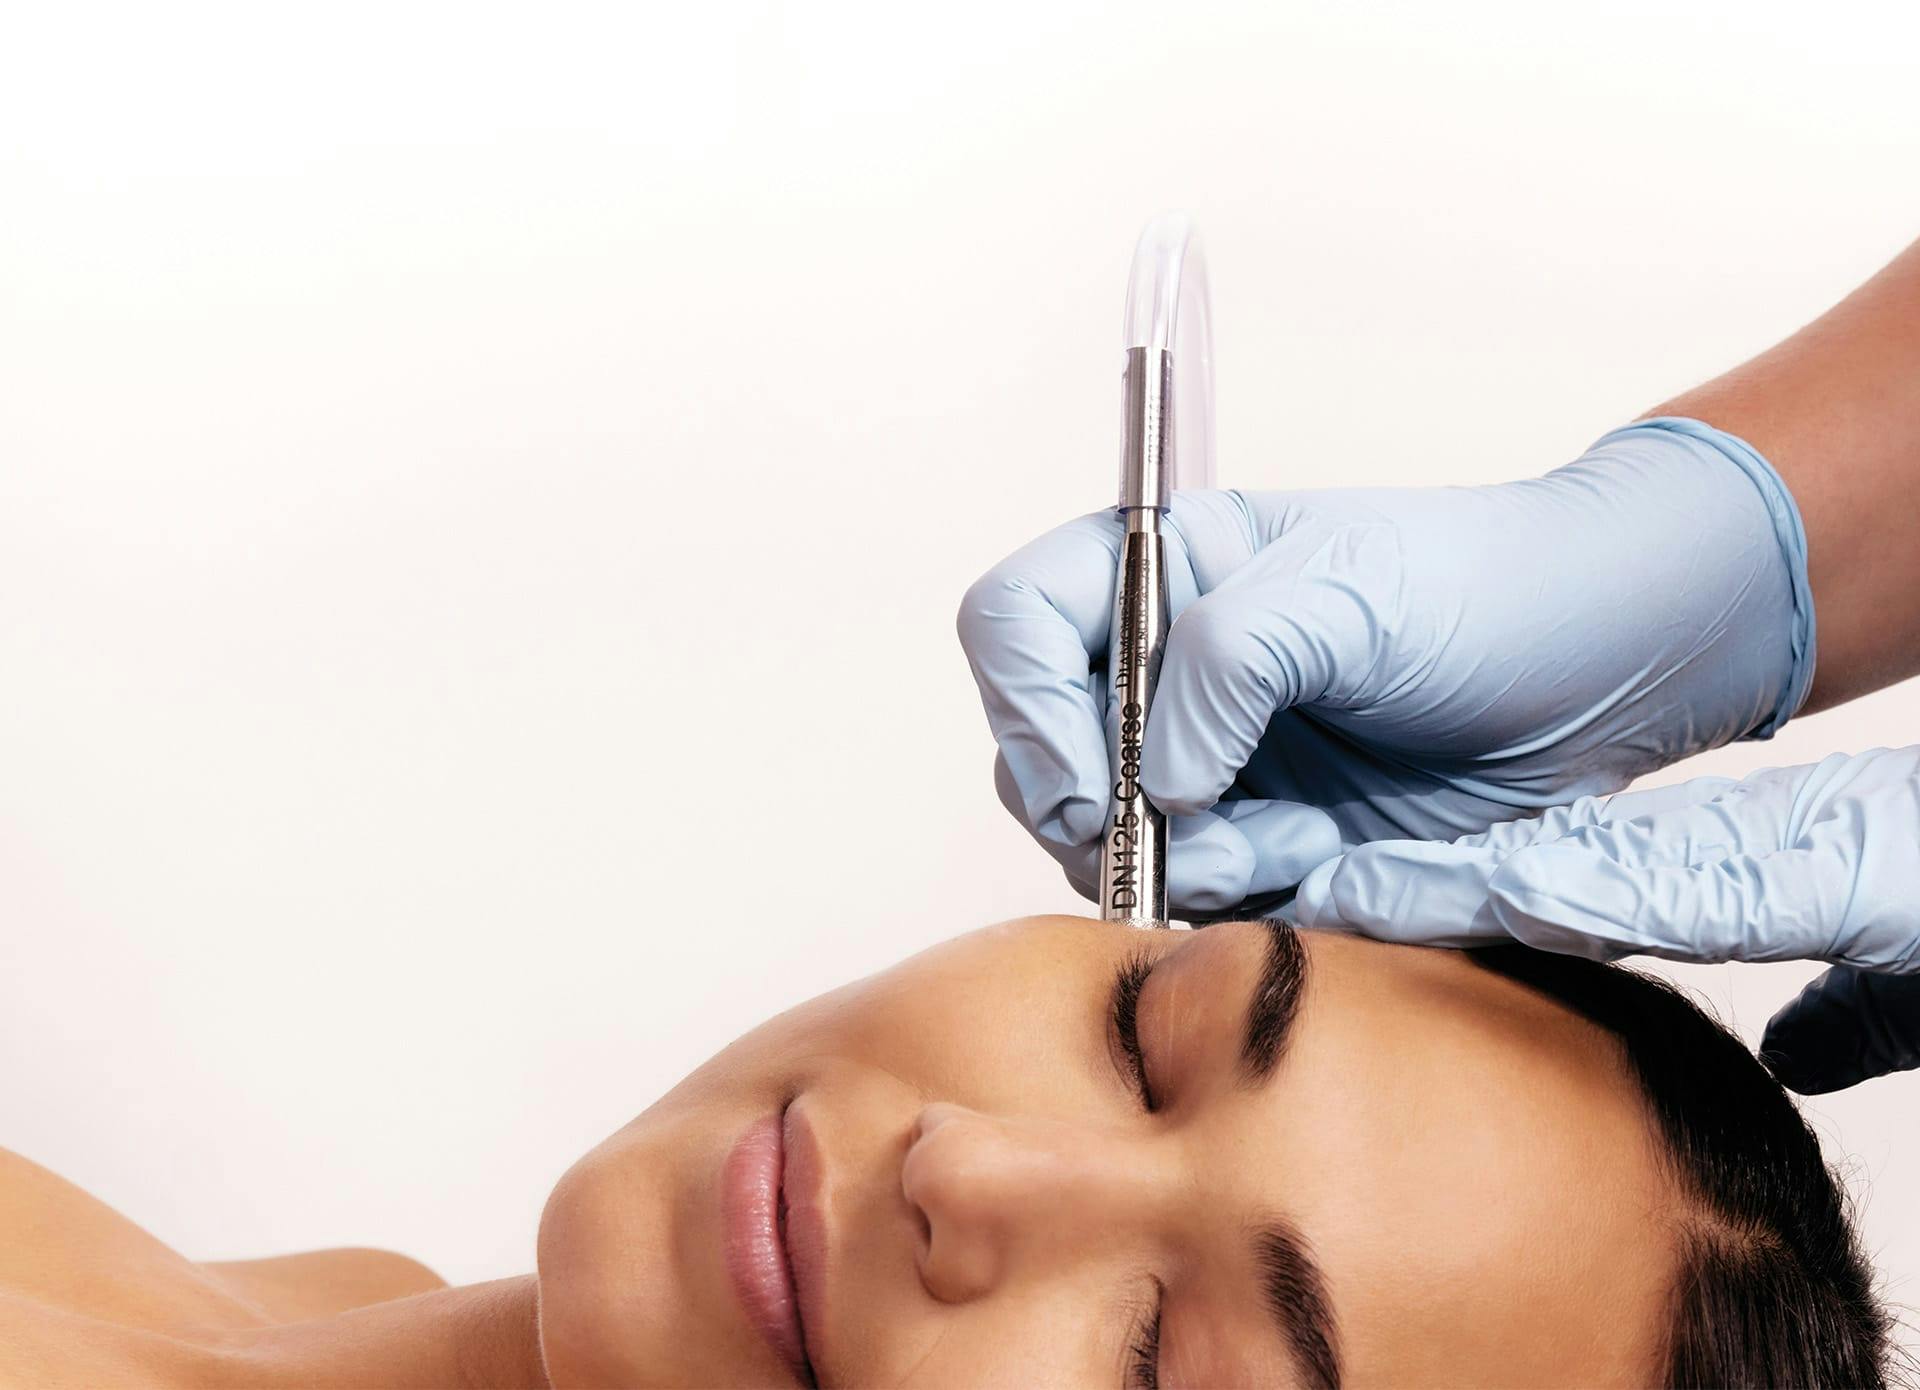 there is a woman receiving DiamondTouch treatment on the side of her face